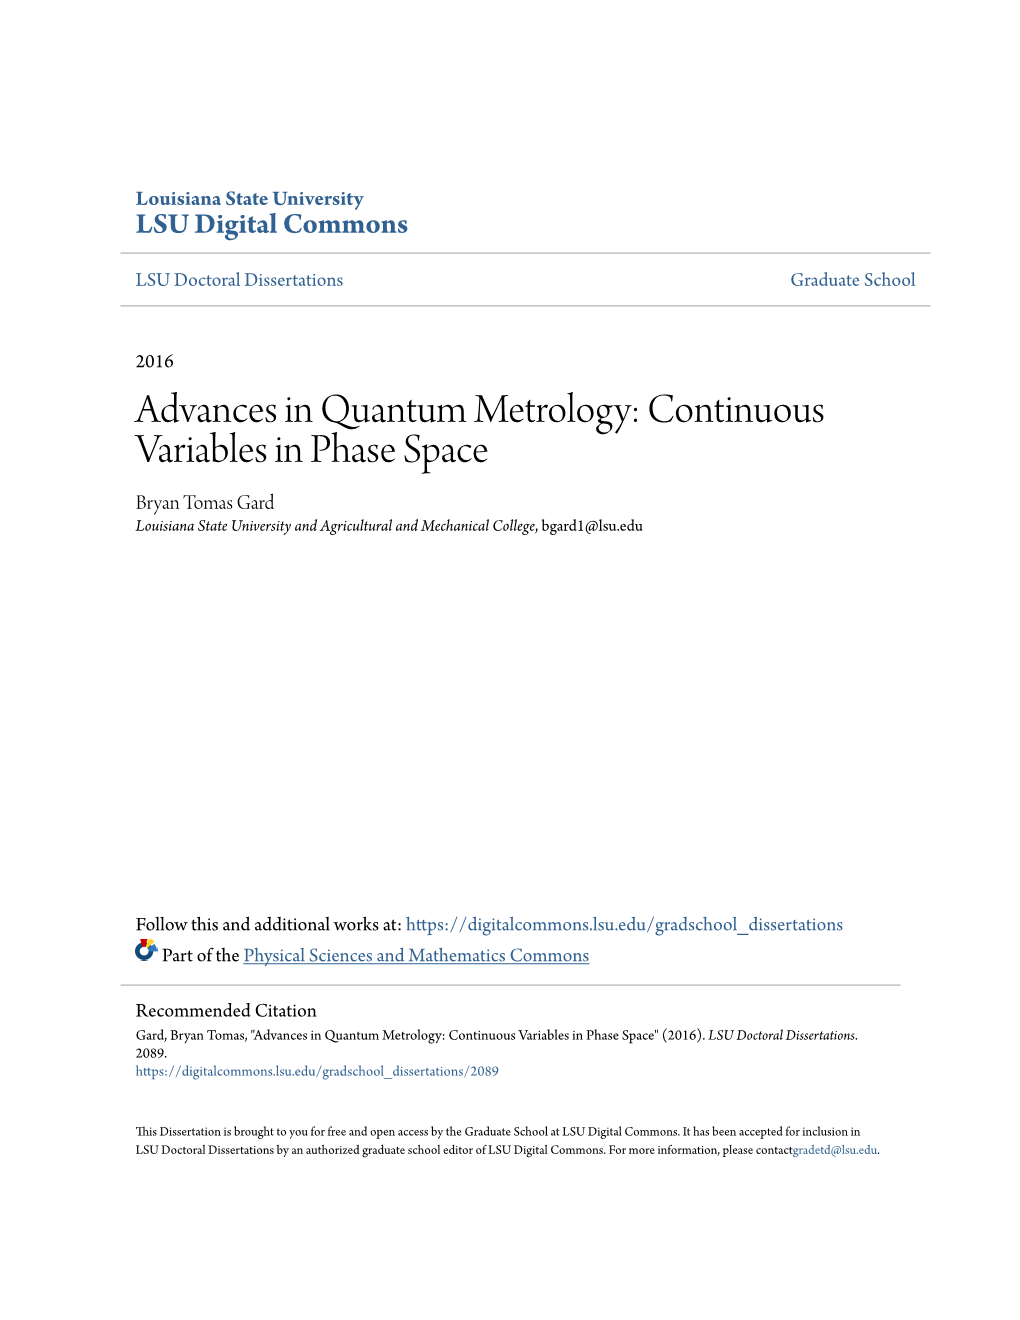 Advances in Quantum Metrology: Continuous Variables in Phase Space Bryan Tomas Gard Louisiana State University and Agricultural and Mechanical College, Bgard1@Lsu.Edu